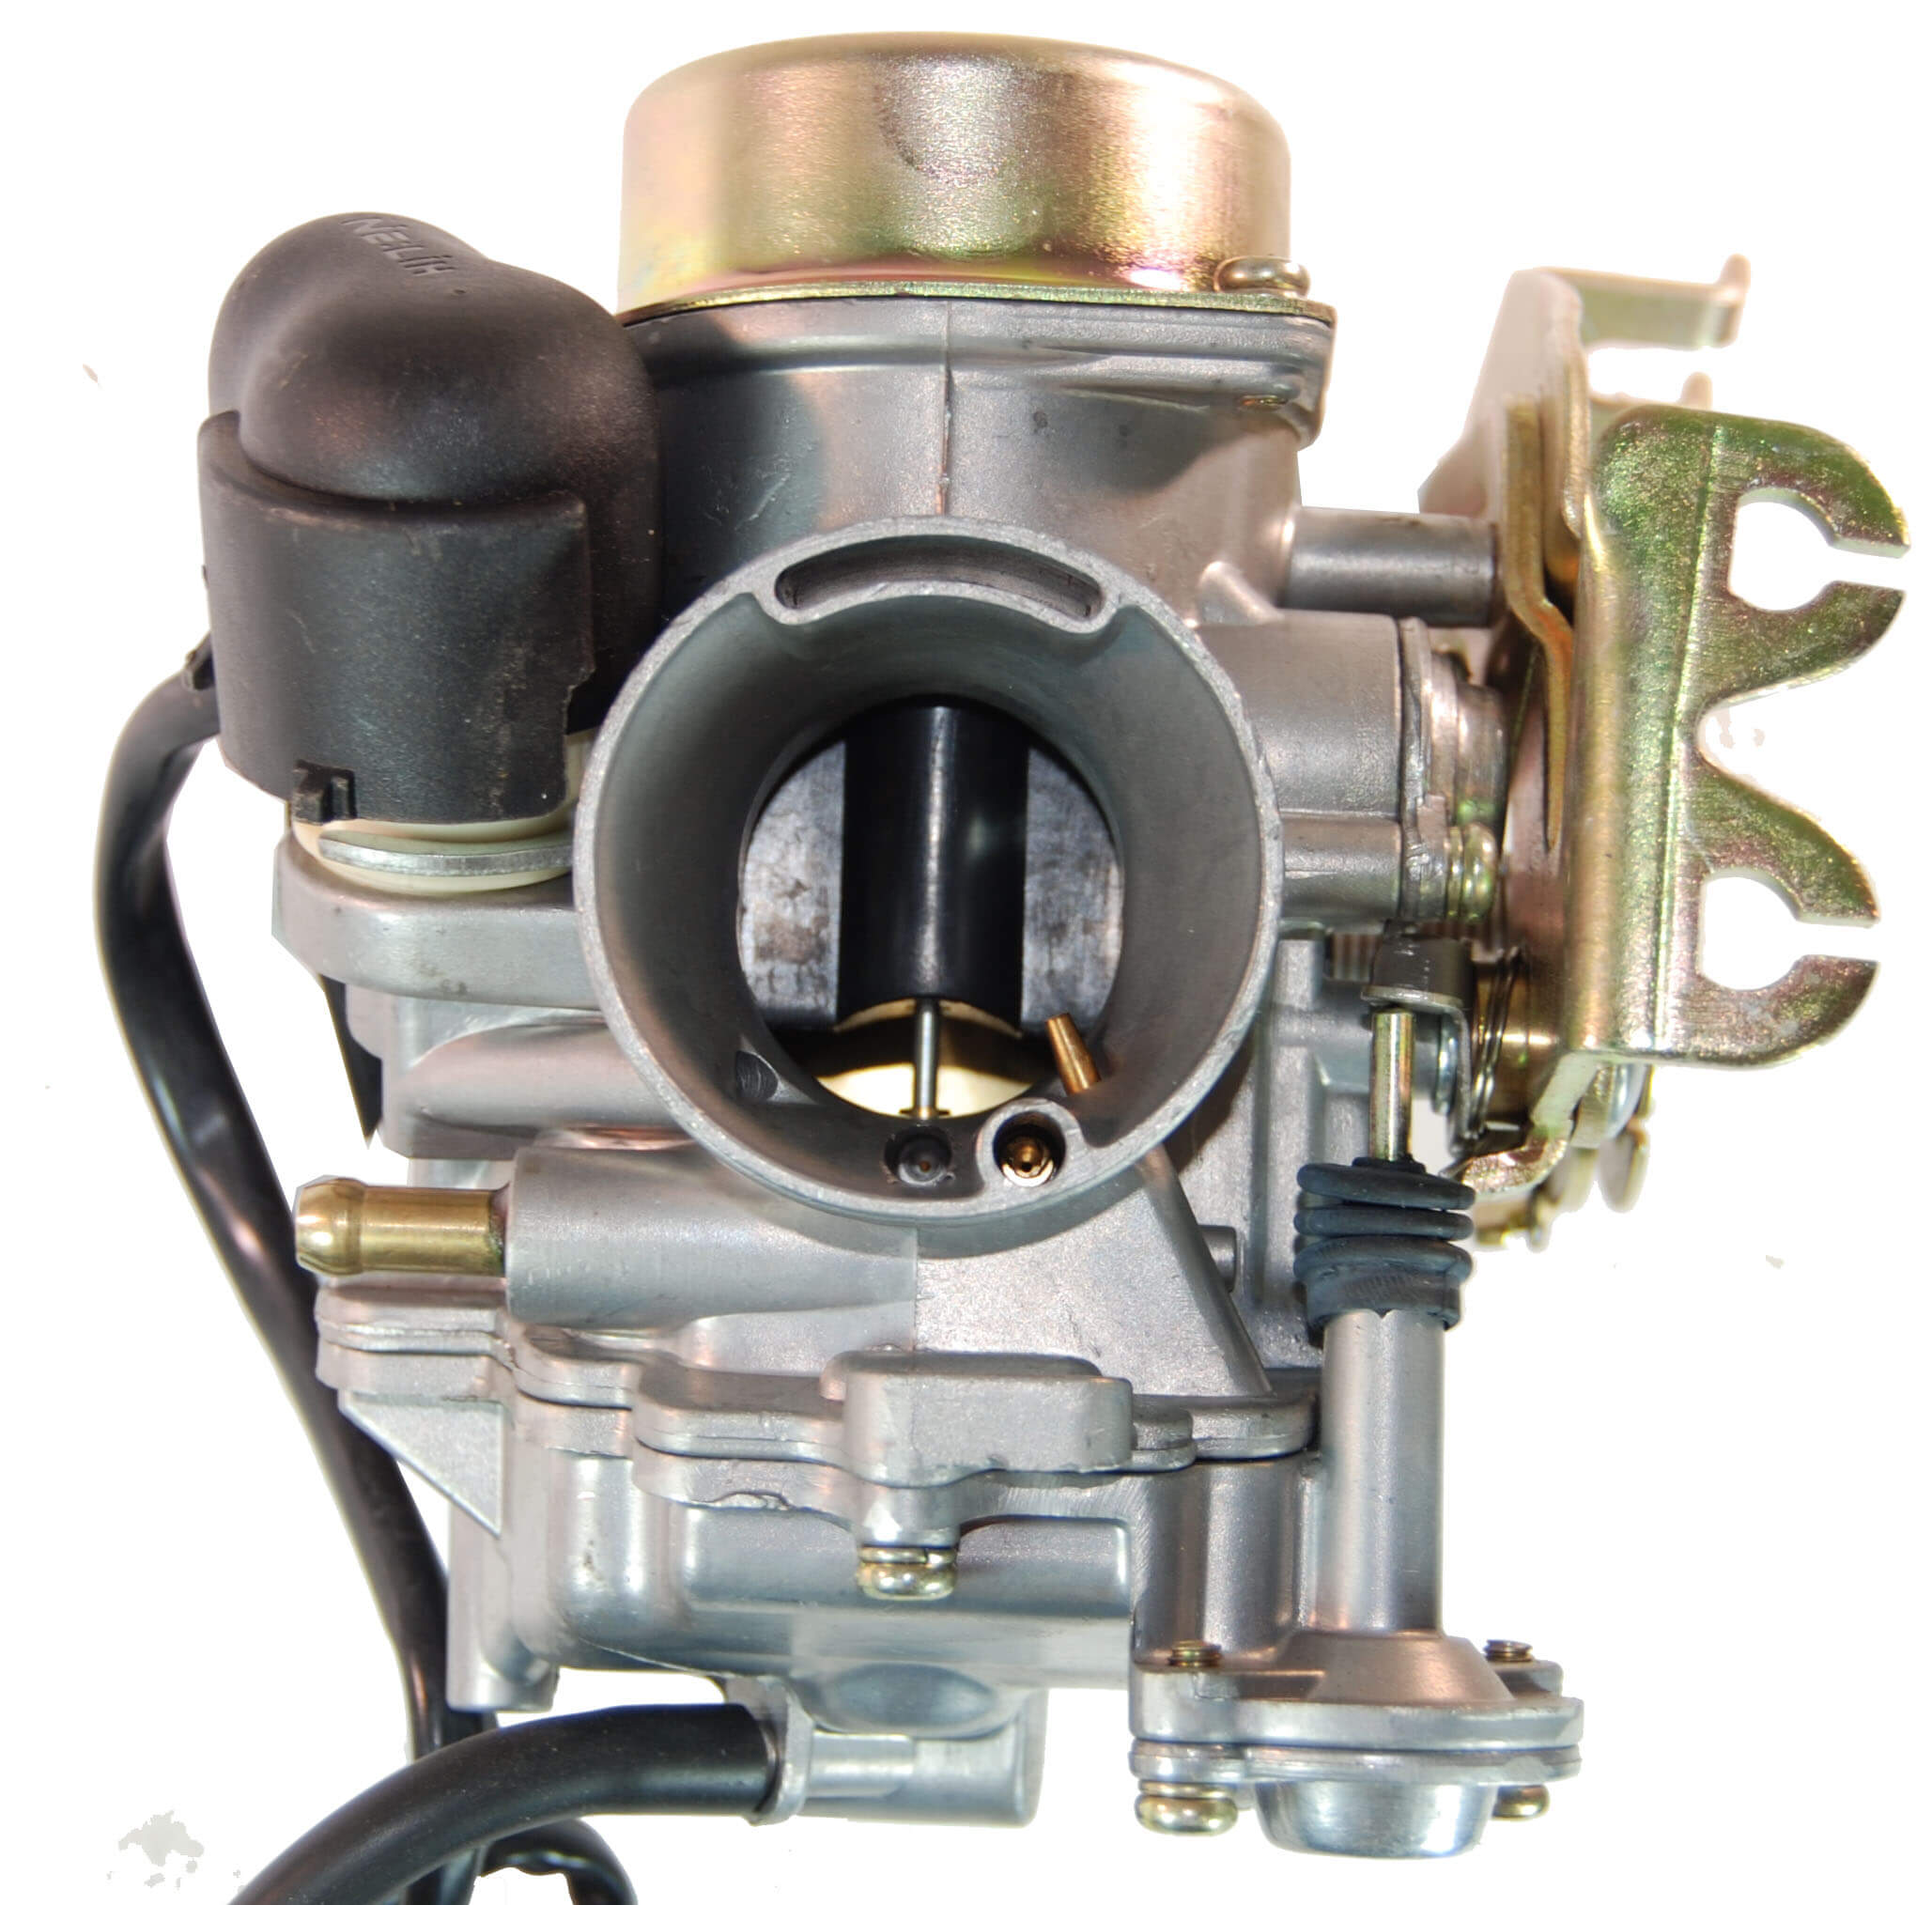 PD31 Carburetor 250-300cc With Pump and Electric Choke Intake ID=30mm Intake OD=36mm / Air Box OD=46mm - Click Image to Close